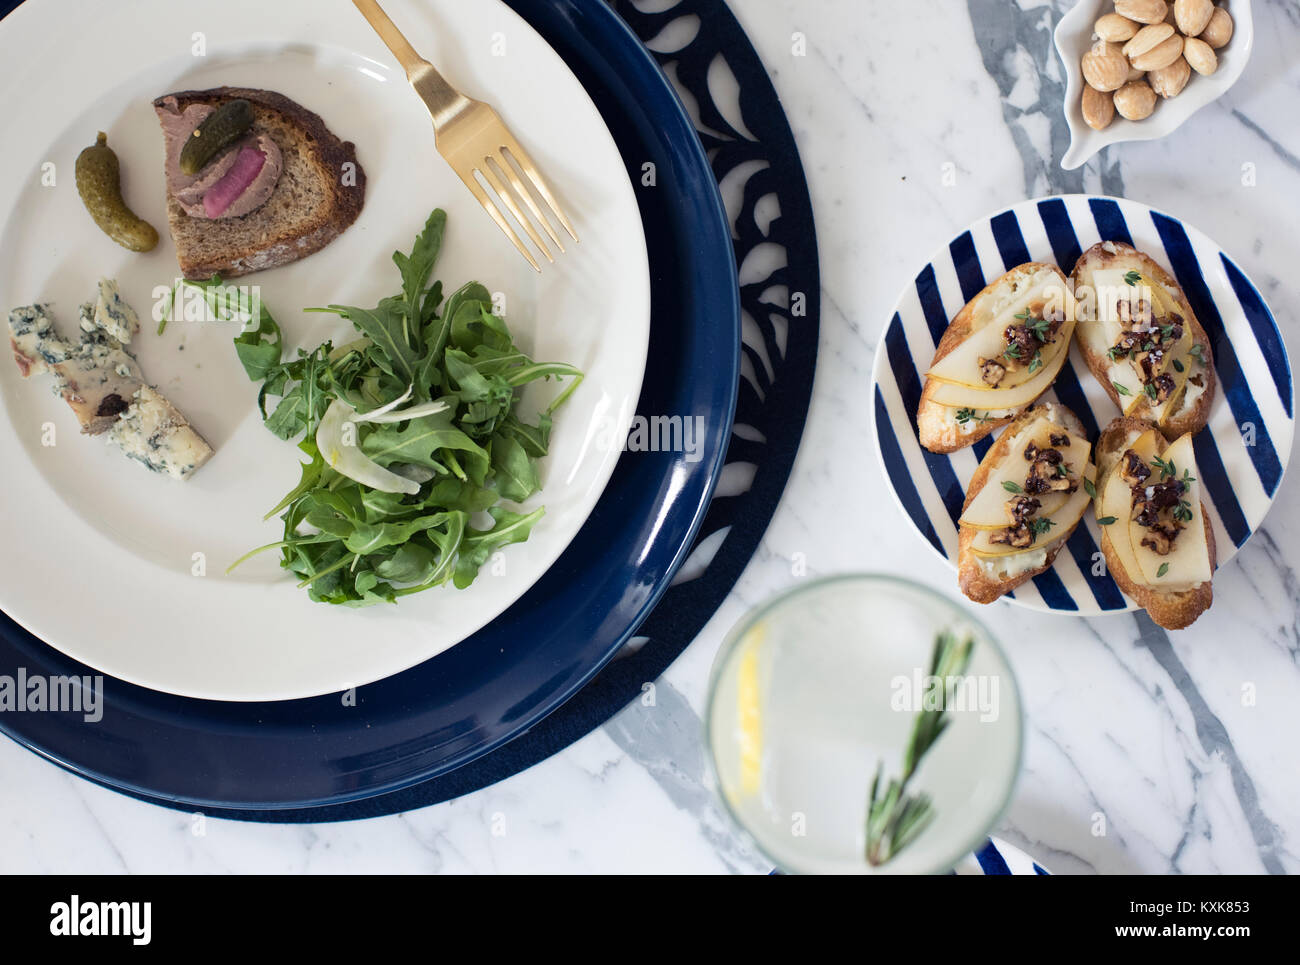 Overhead view of appetizers in plate on table Stock Photo